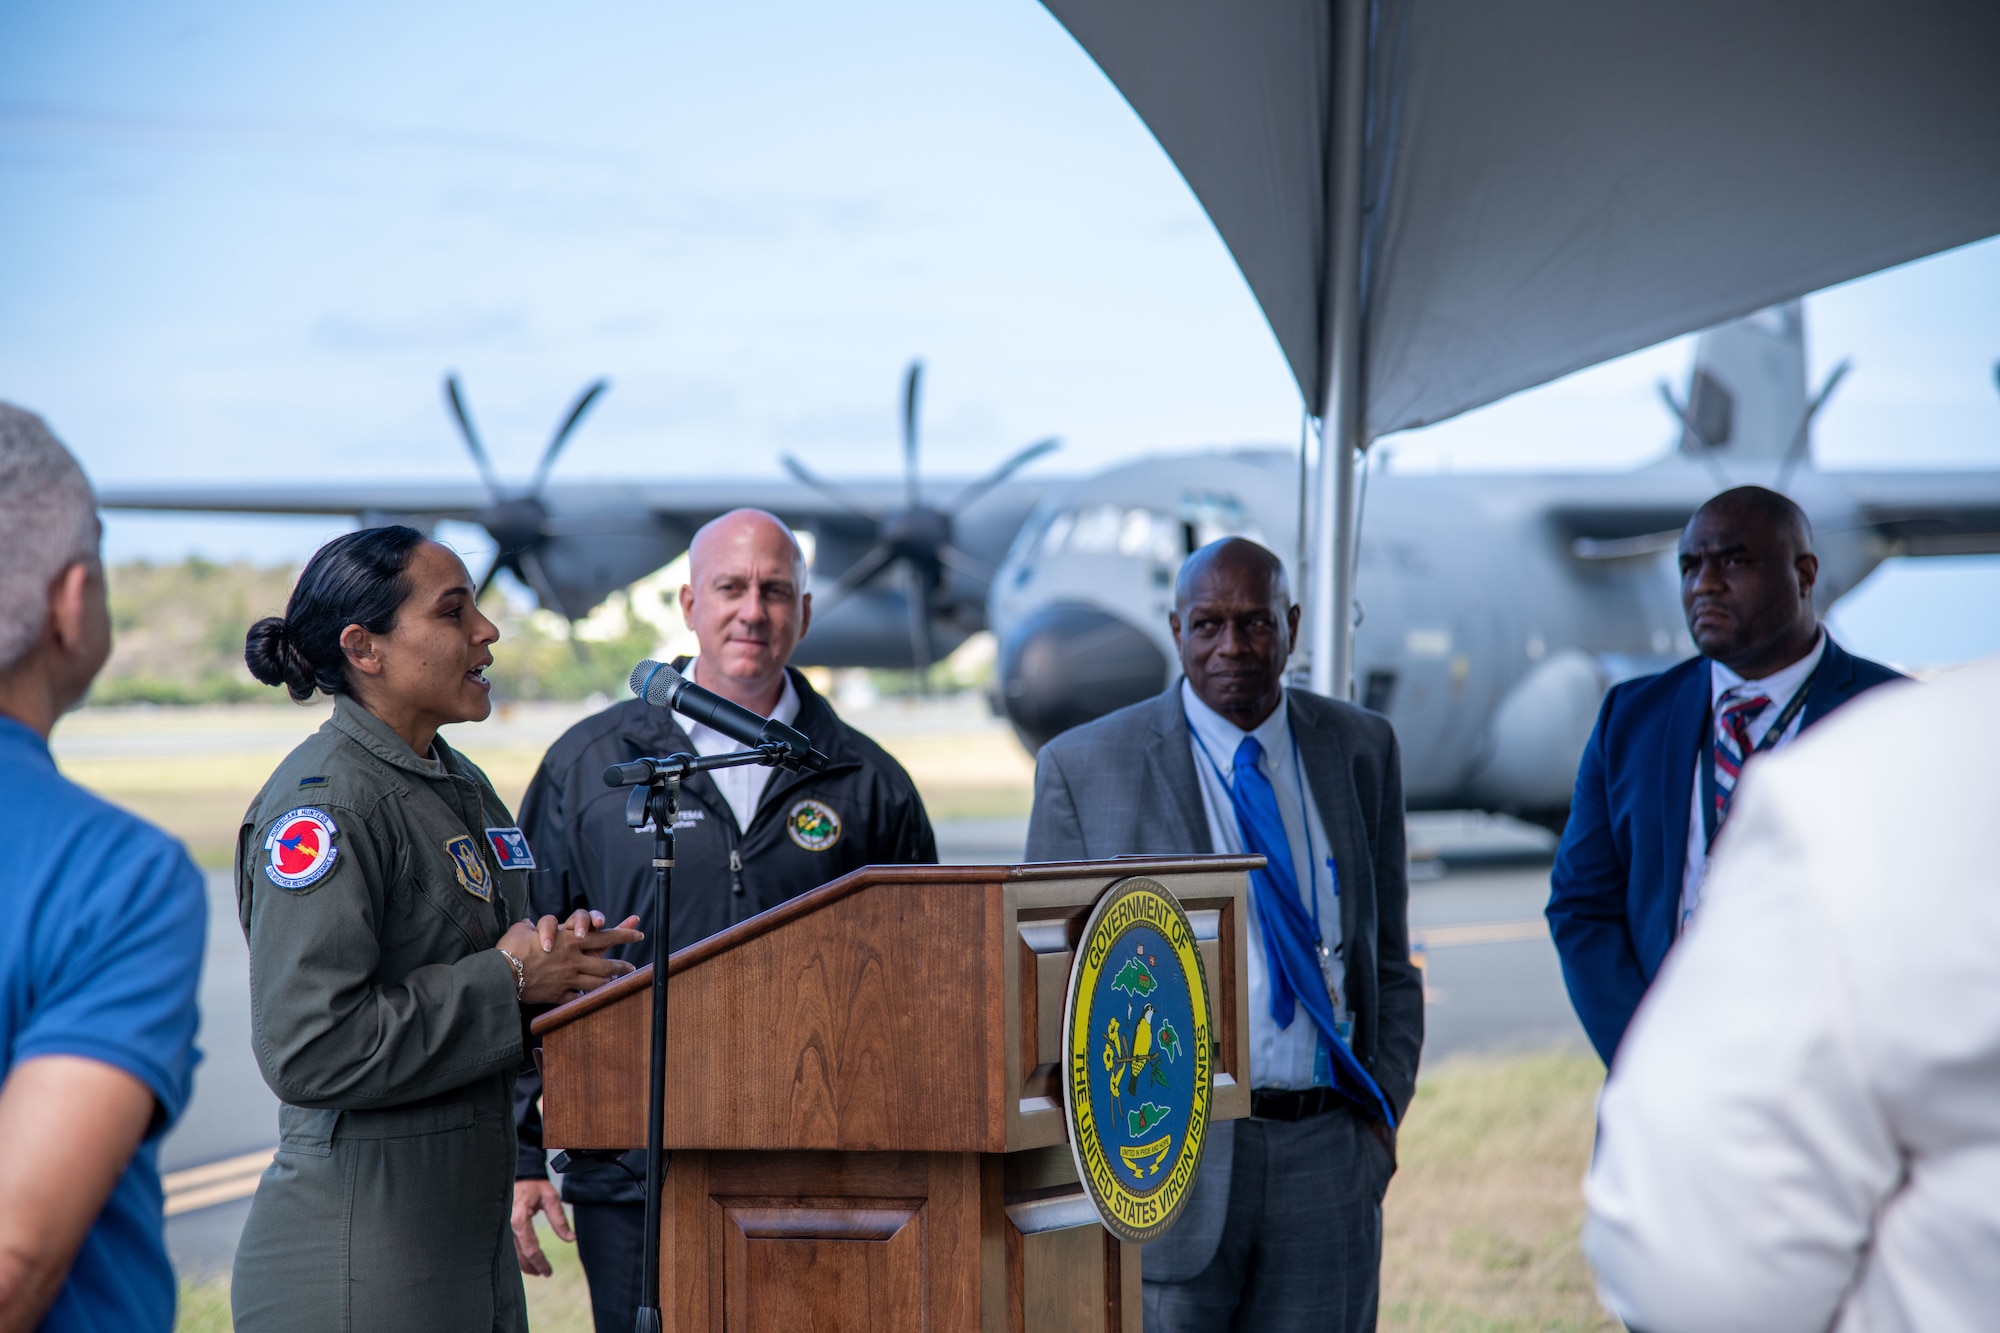 Lt. Cotto stands at a podium speaking. People are in the foreground and background. With a WC-130J in the background also.